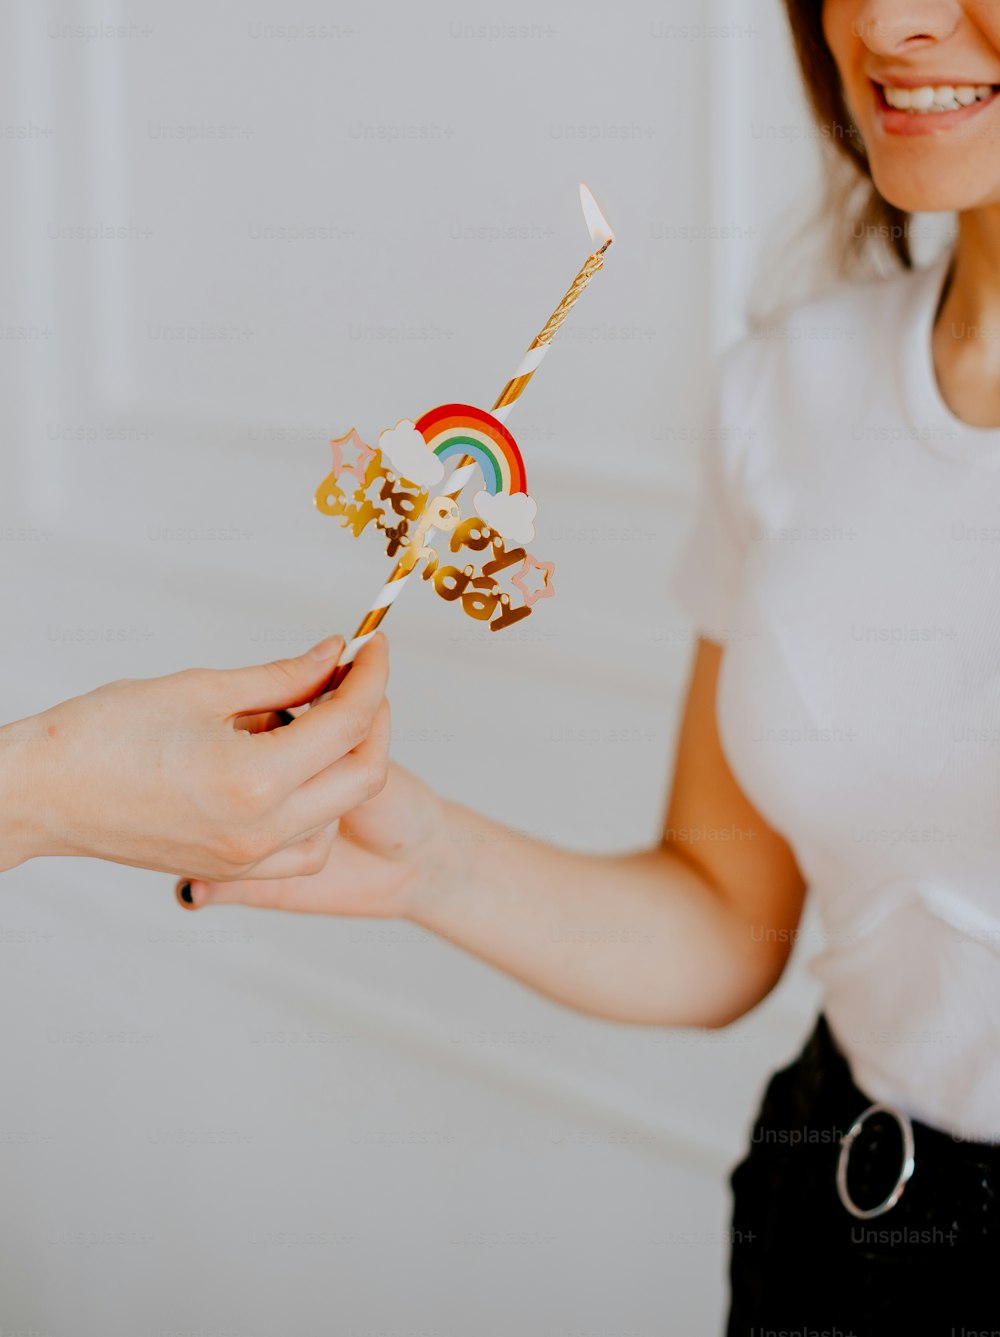 a woman is holding a toy with a rainbow on it